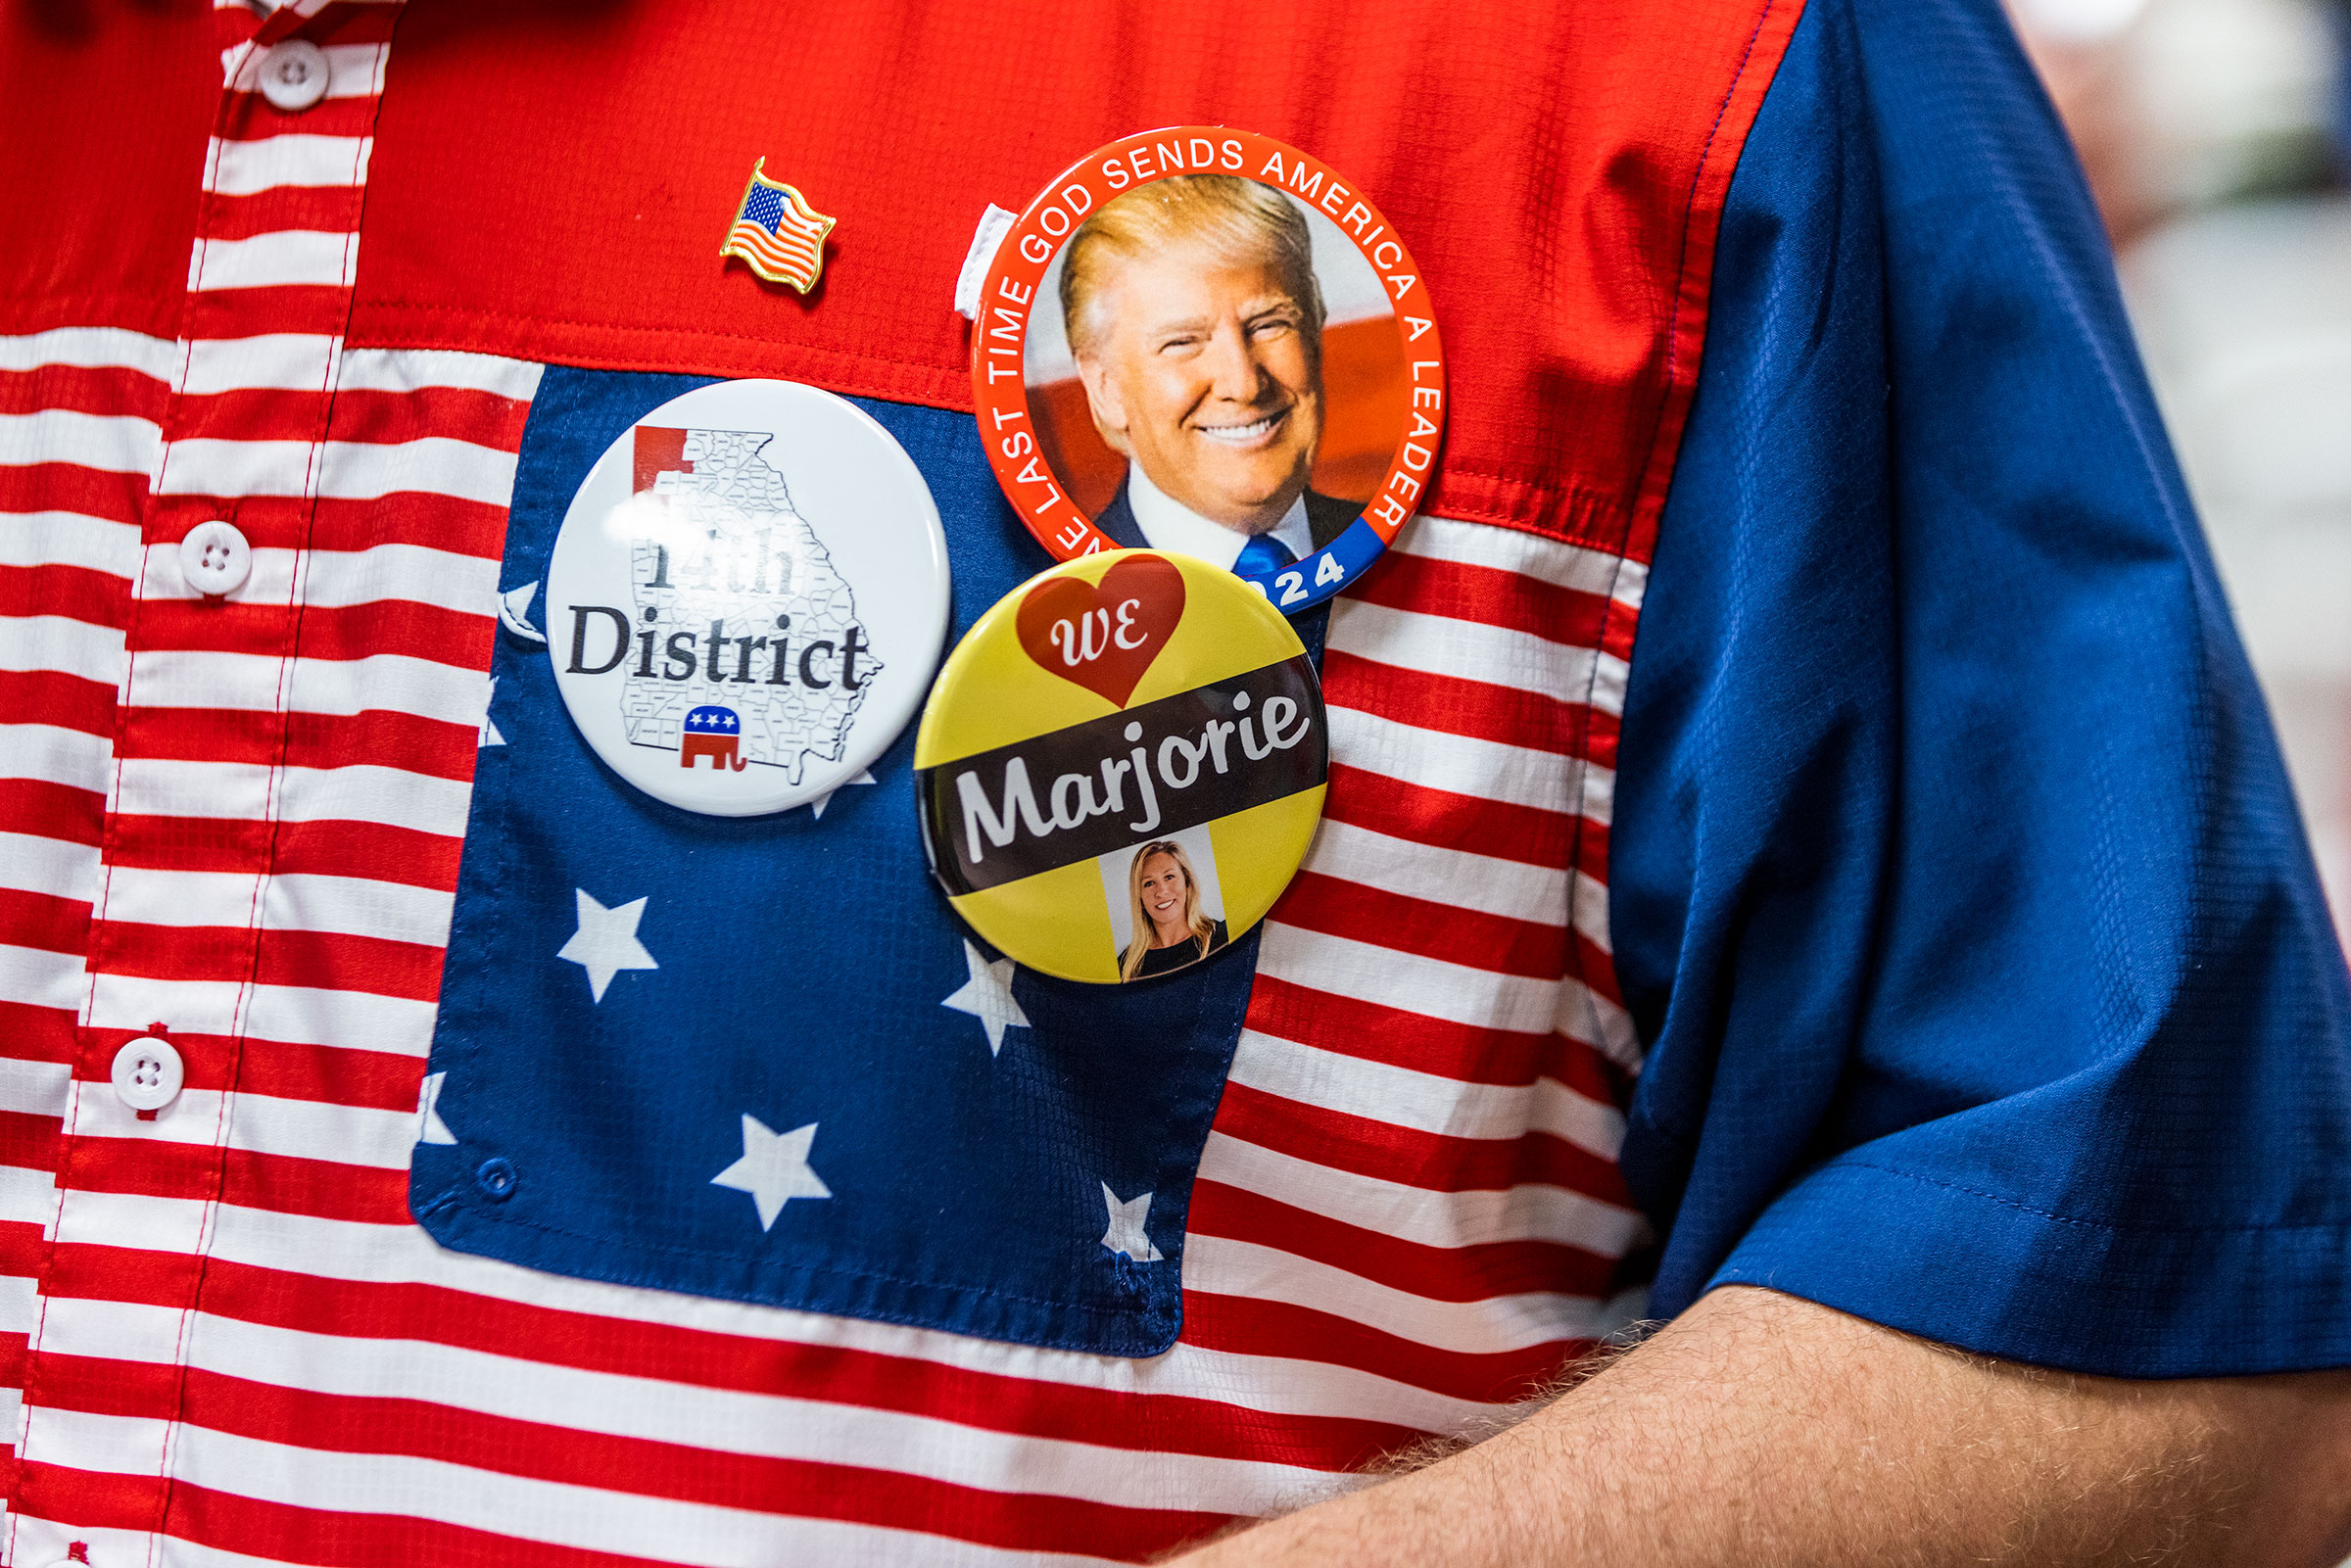 A Greene supporter in Ringgold, Ga. (Andrew Hetherington for TIME)